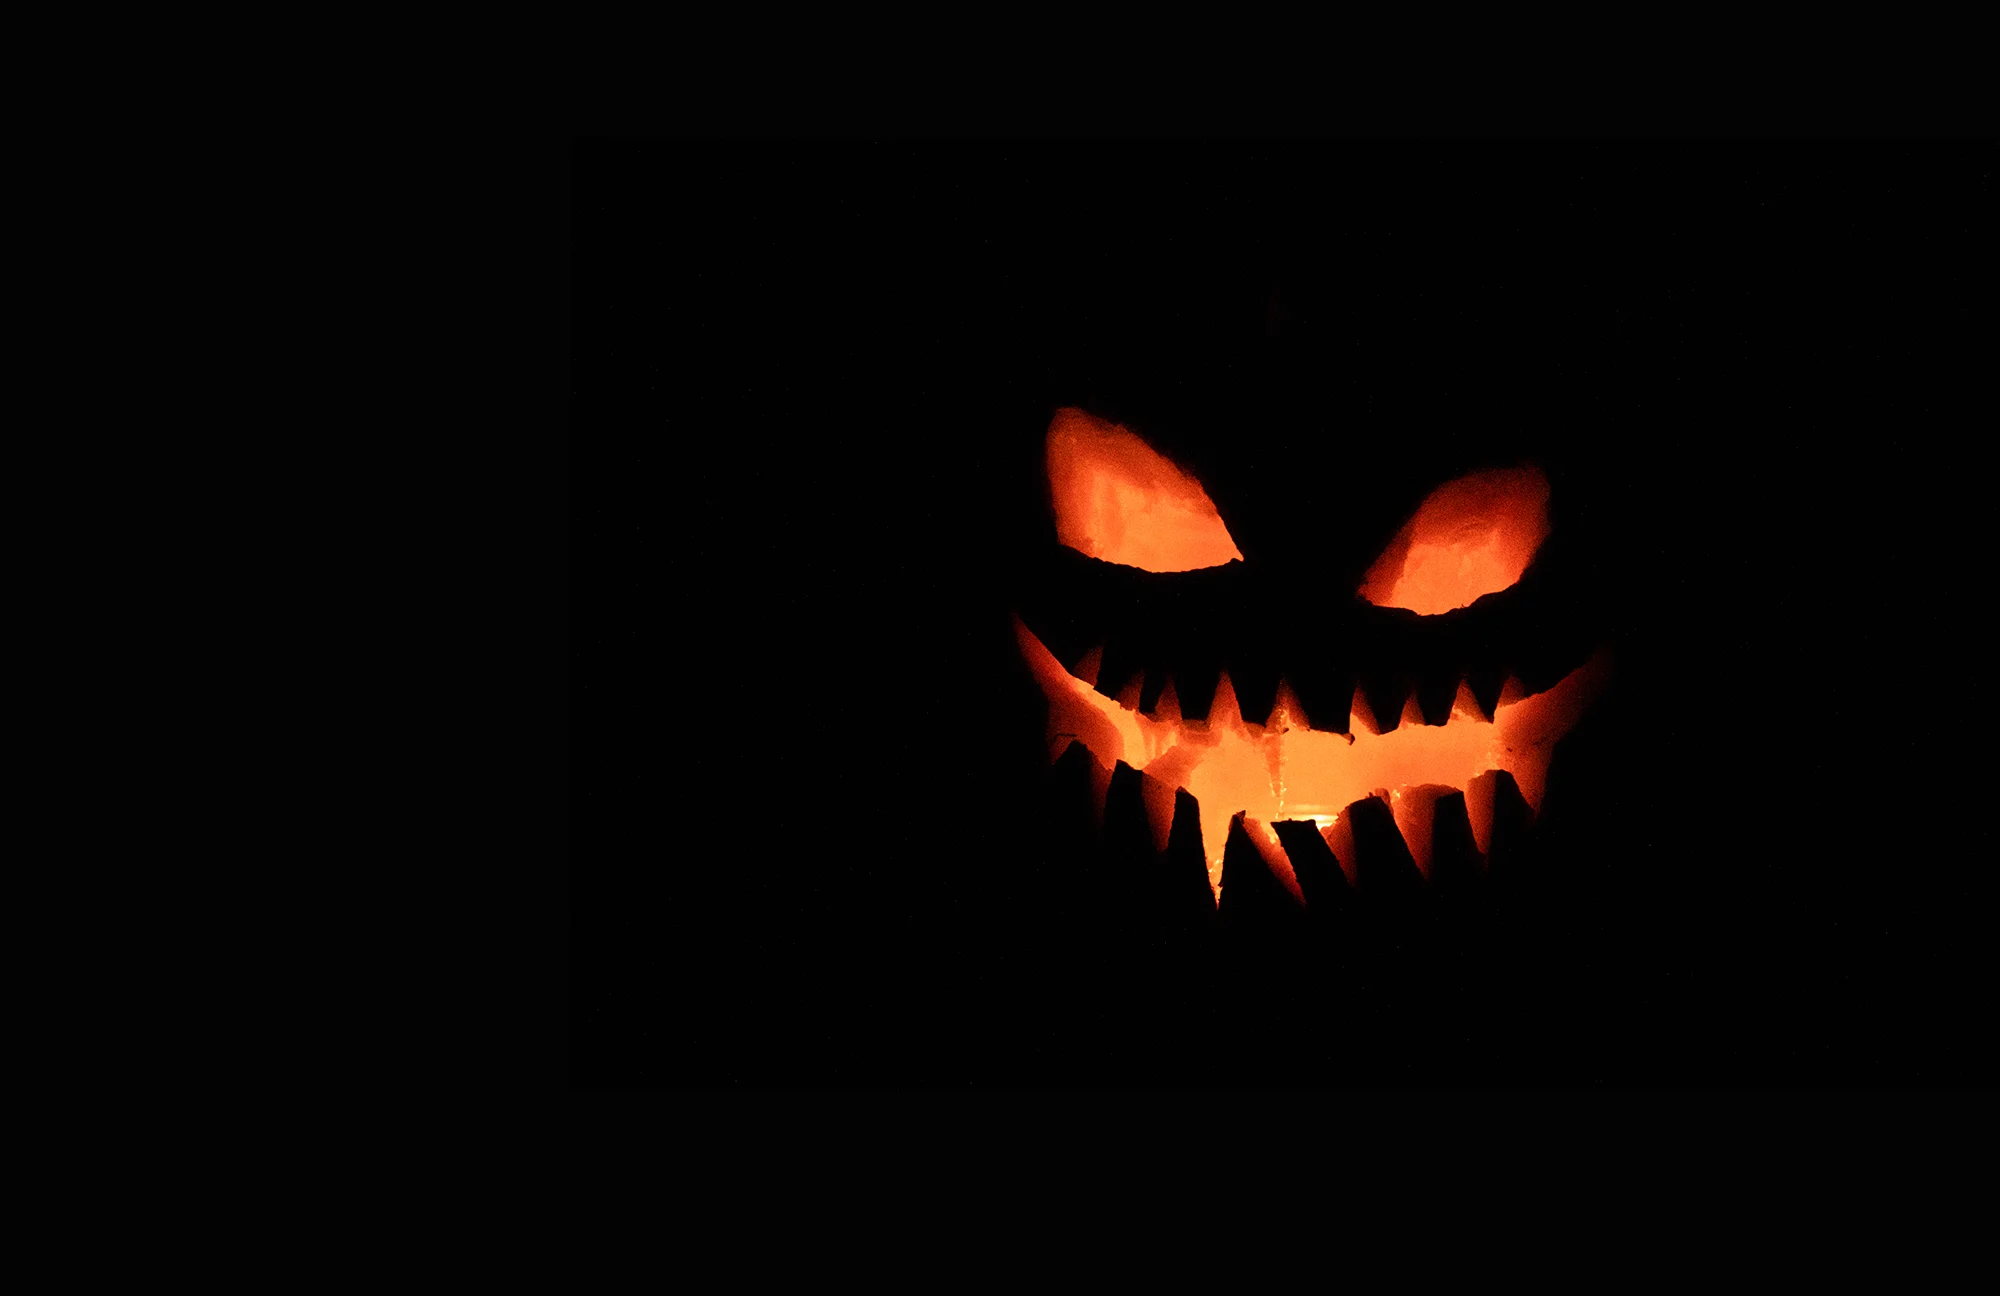 A spooky grinning pumpkin face glowing orange against a black background